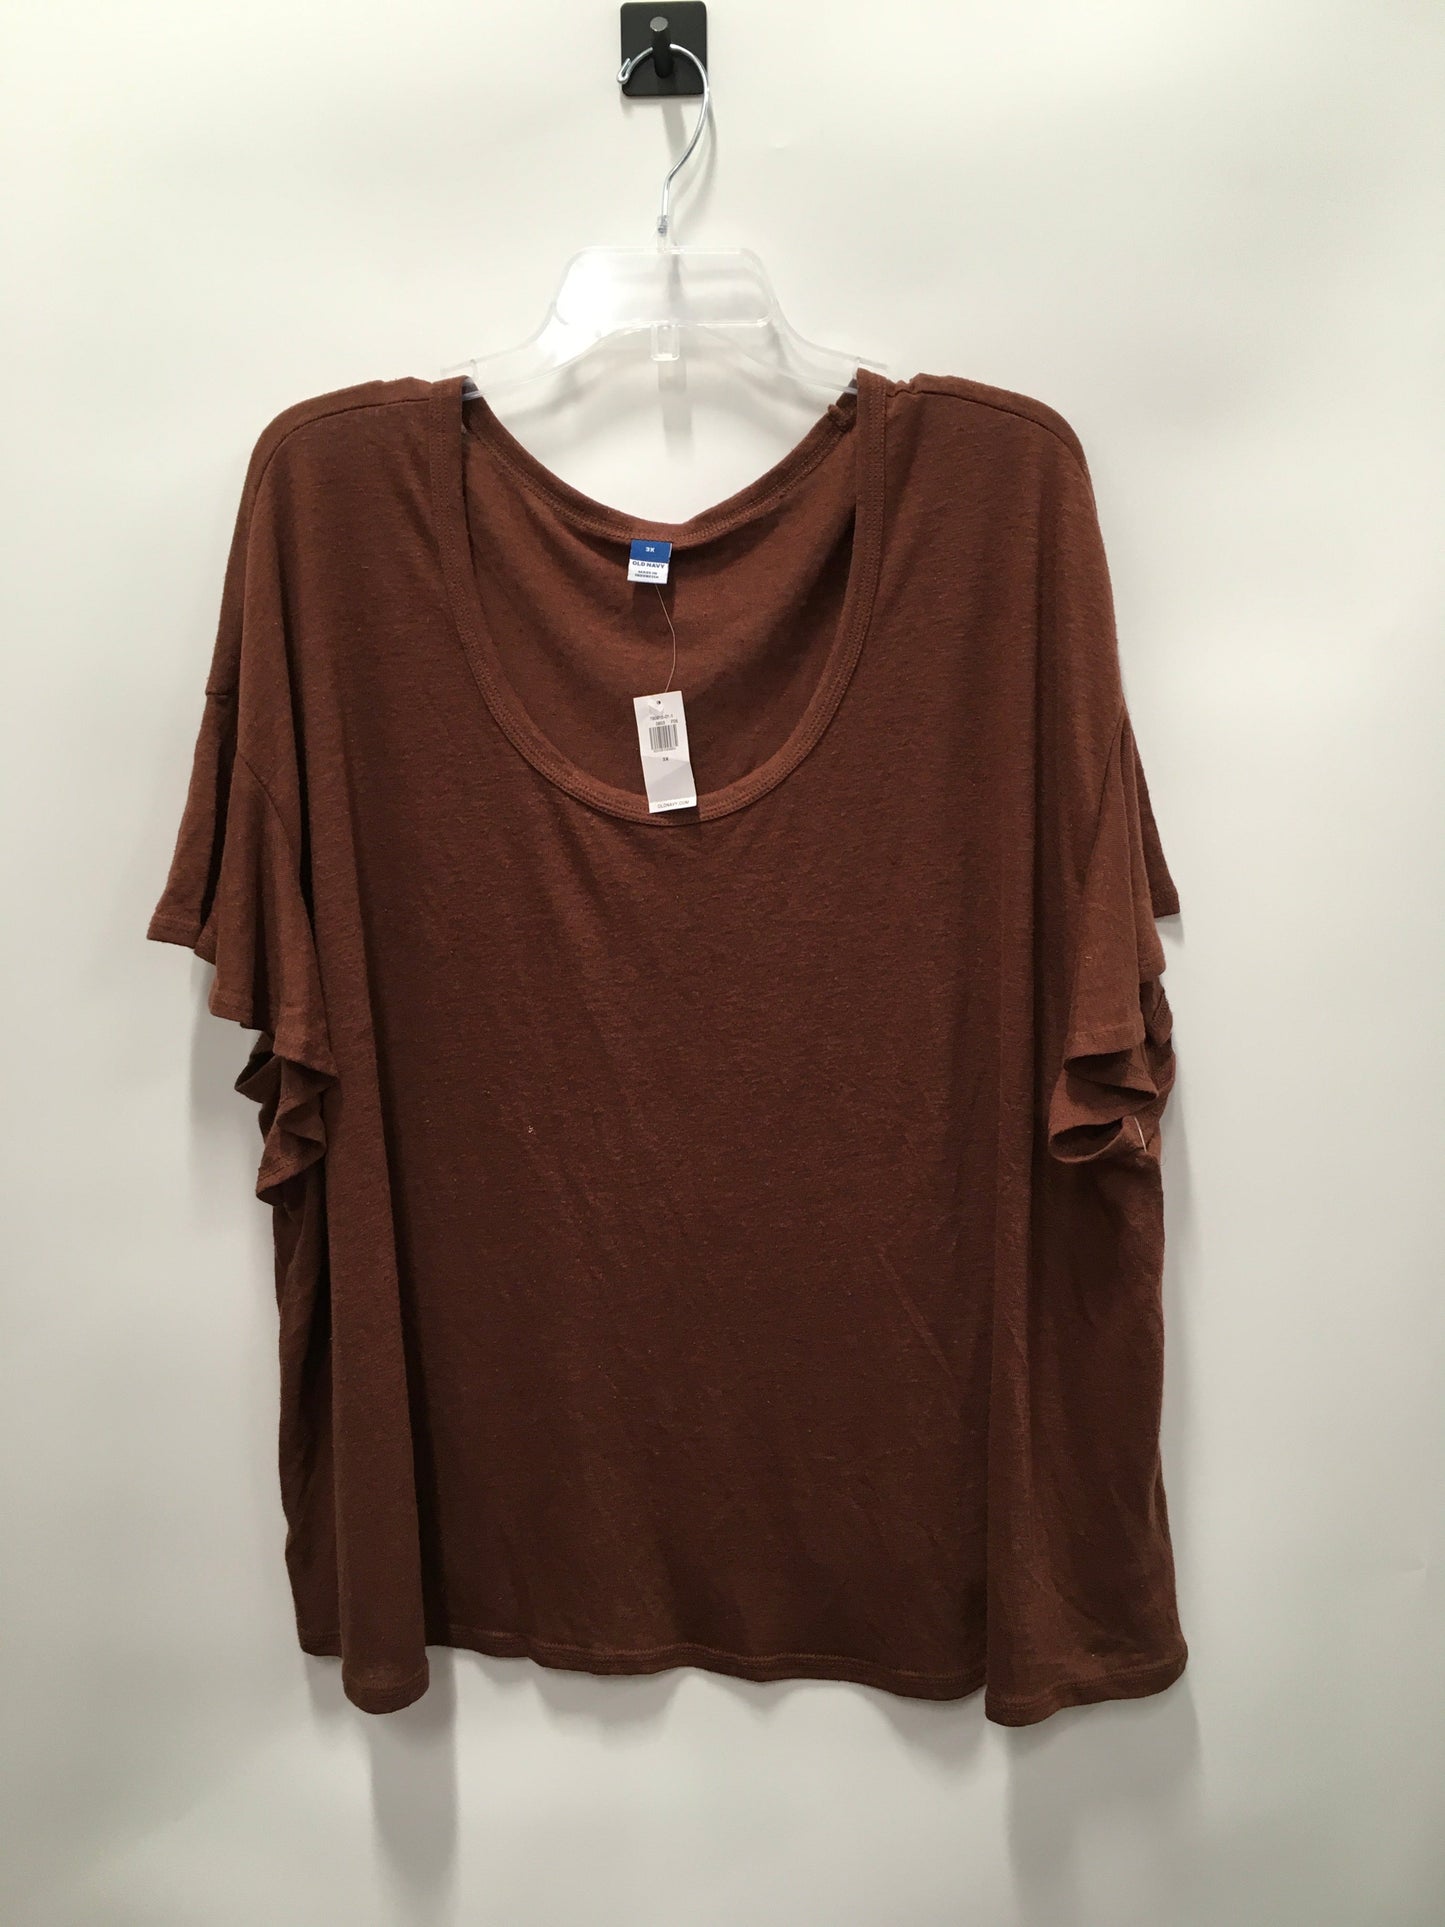 Brown Top Short Sleeve Basic Old Navy, Size 3x